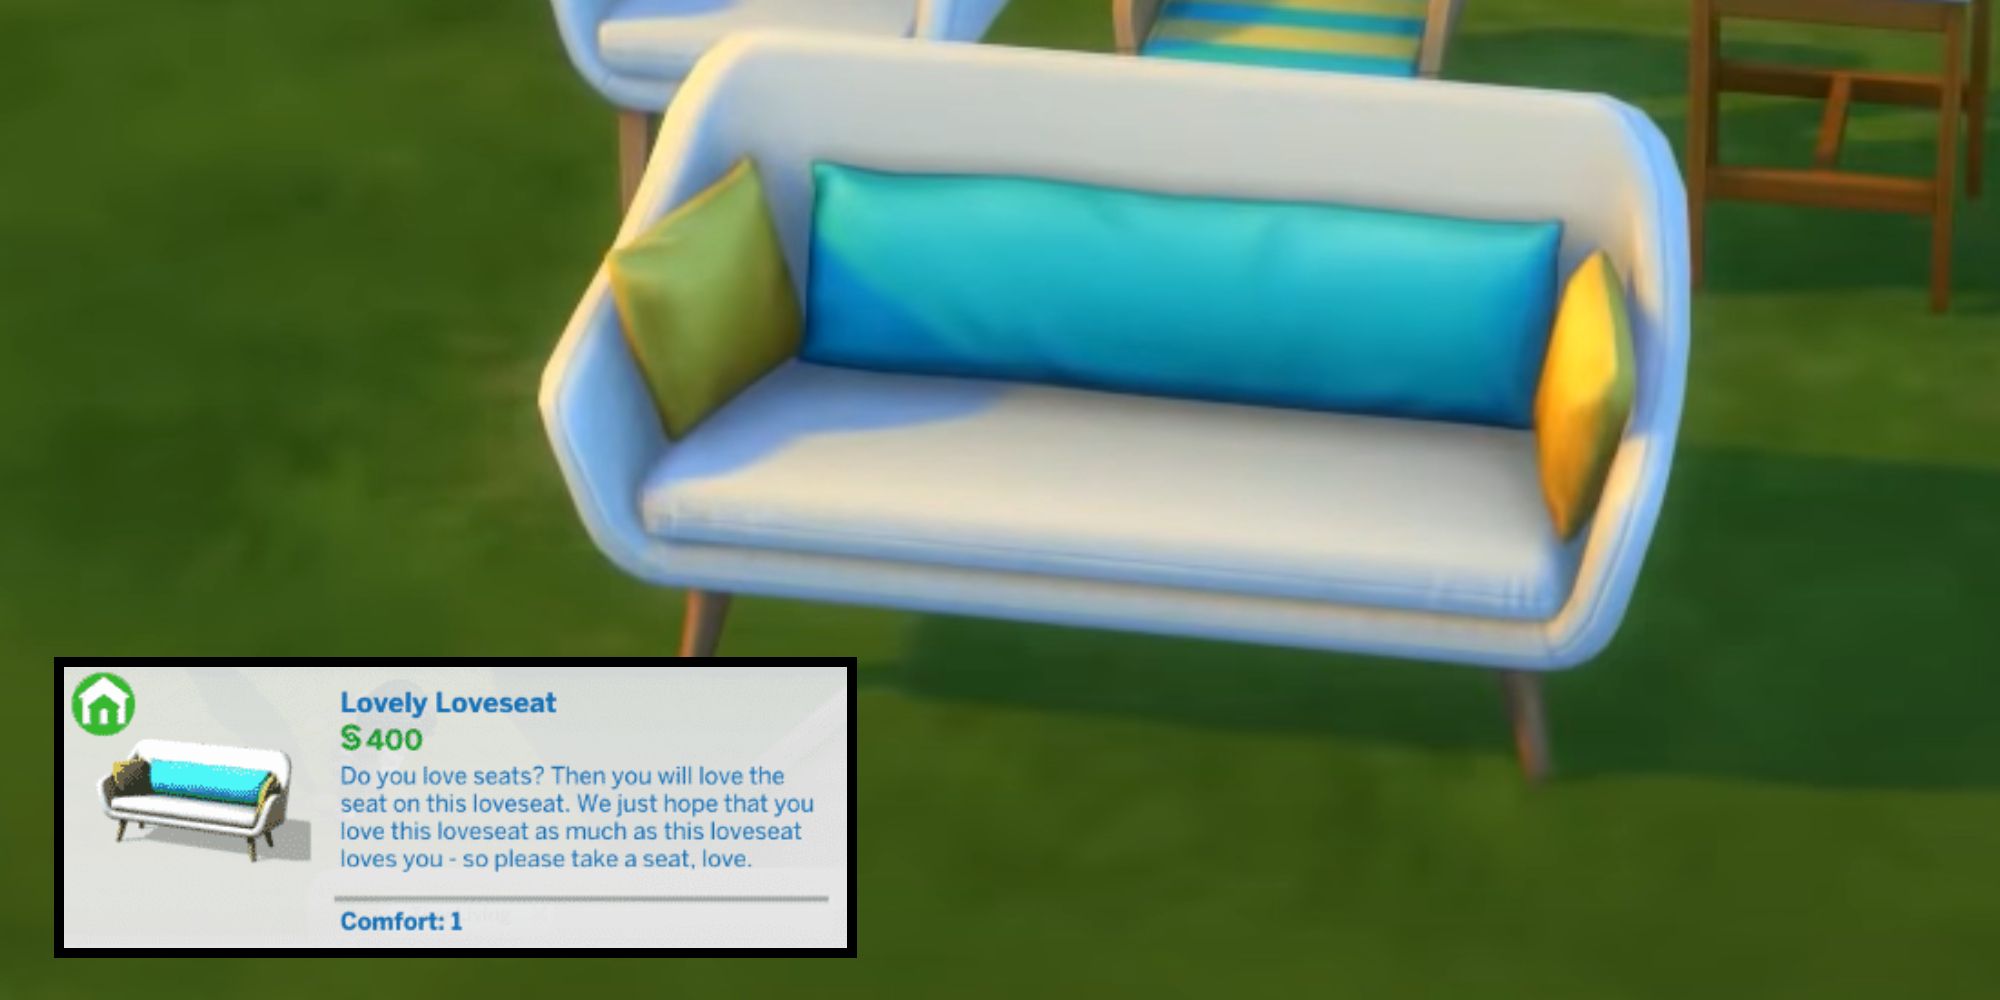 The Lovely Loveseat has a funny description in build/buy mode